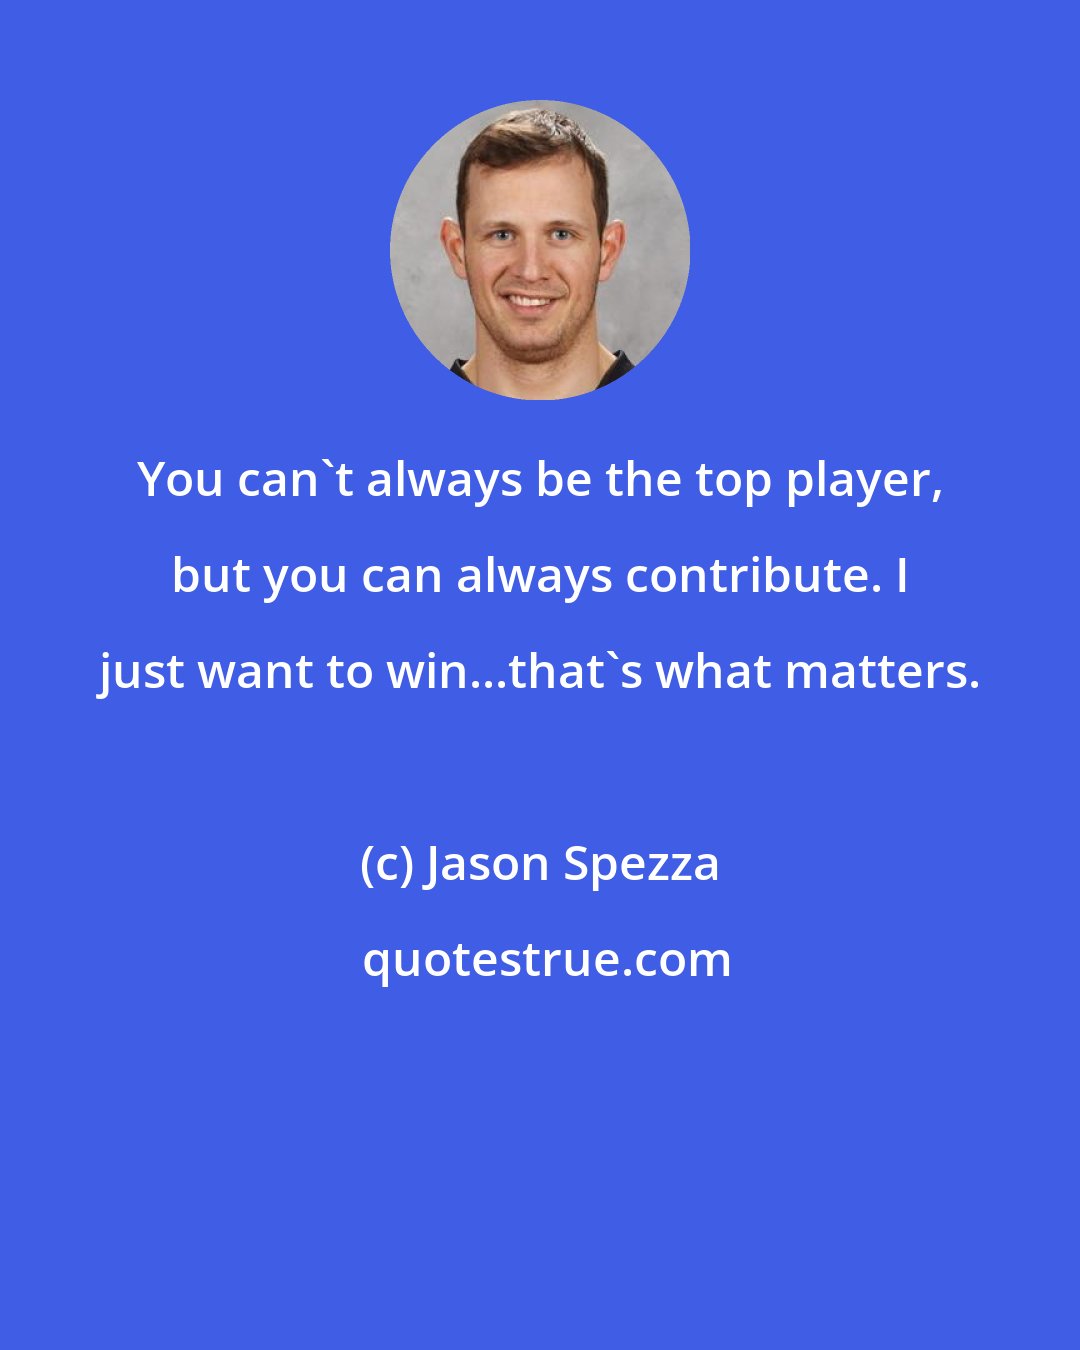 Jason Spezza: You can't always be the top player, but you can always contribute. I just want to win...that's what matters.